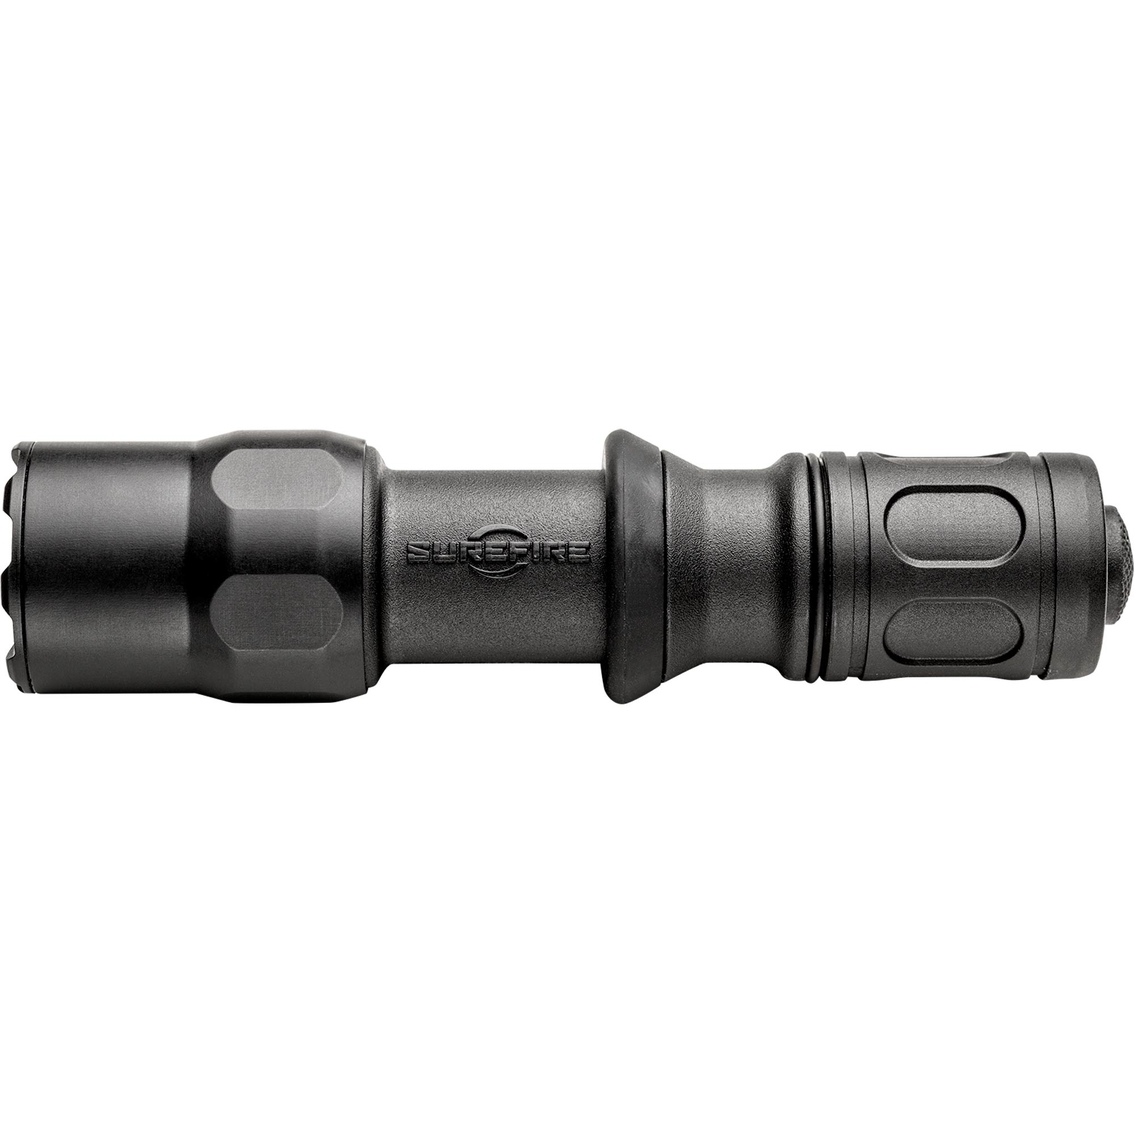 Surefire G2Z Combat Light with MaxVision - Image 2 of 5